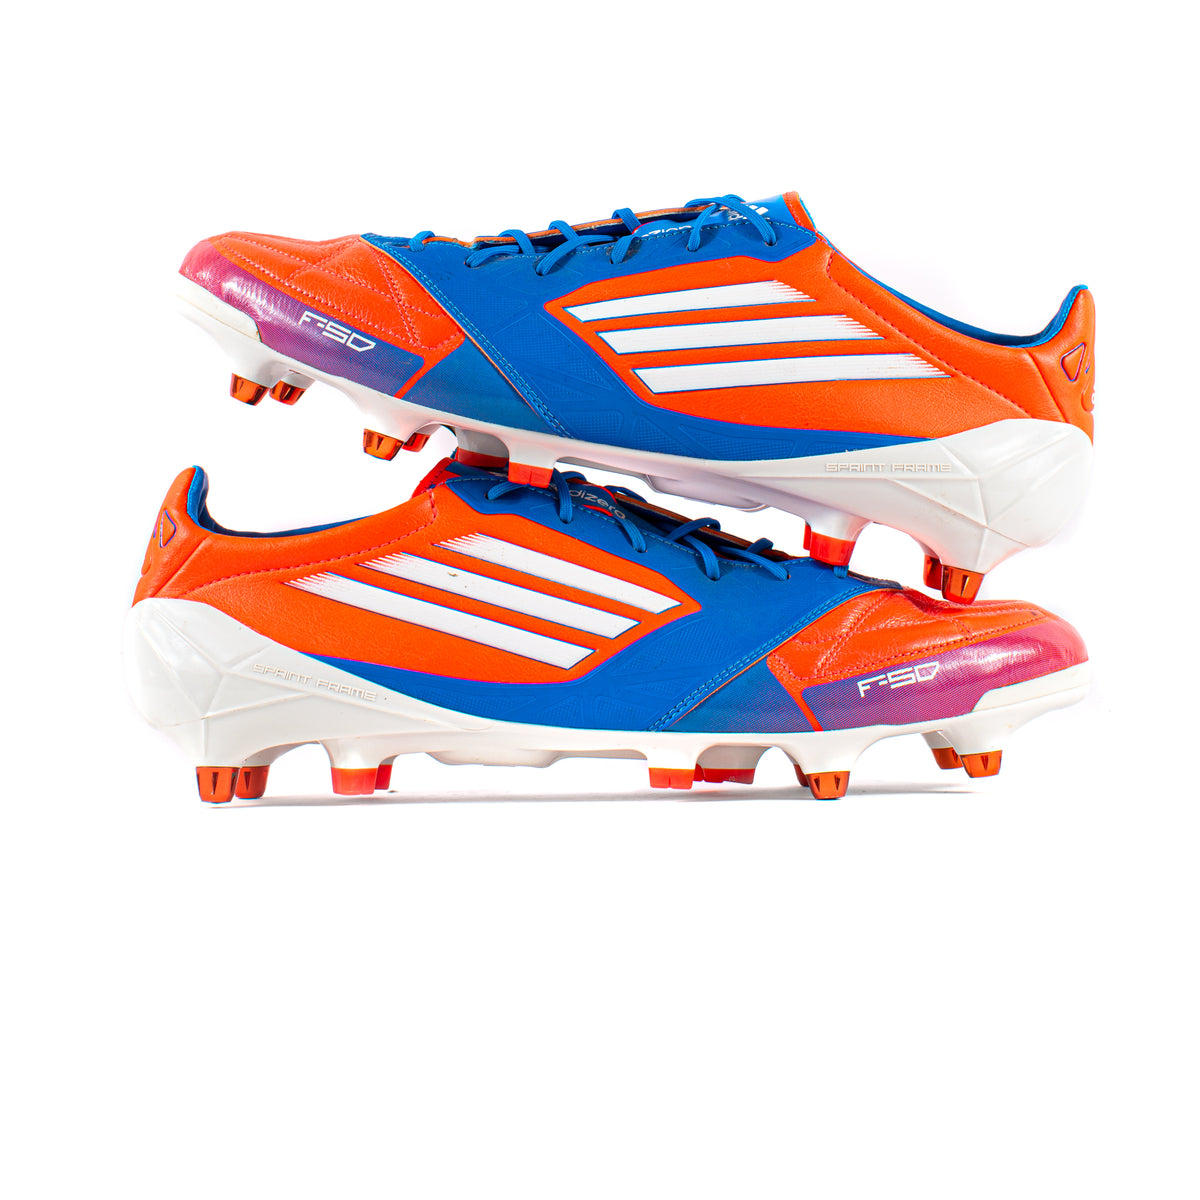 F50 Adizero Leather Blue Red TRX SG – Classic Soccer Cleats